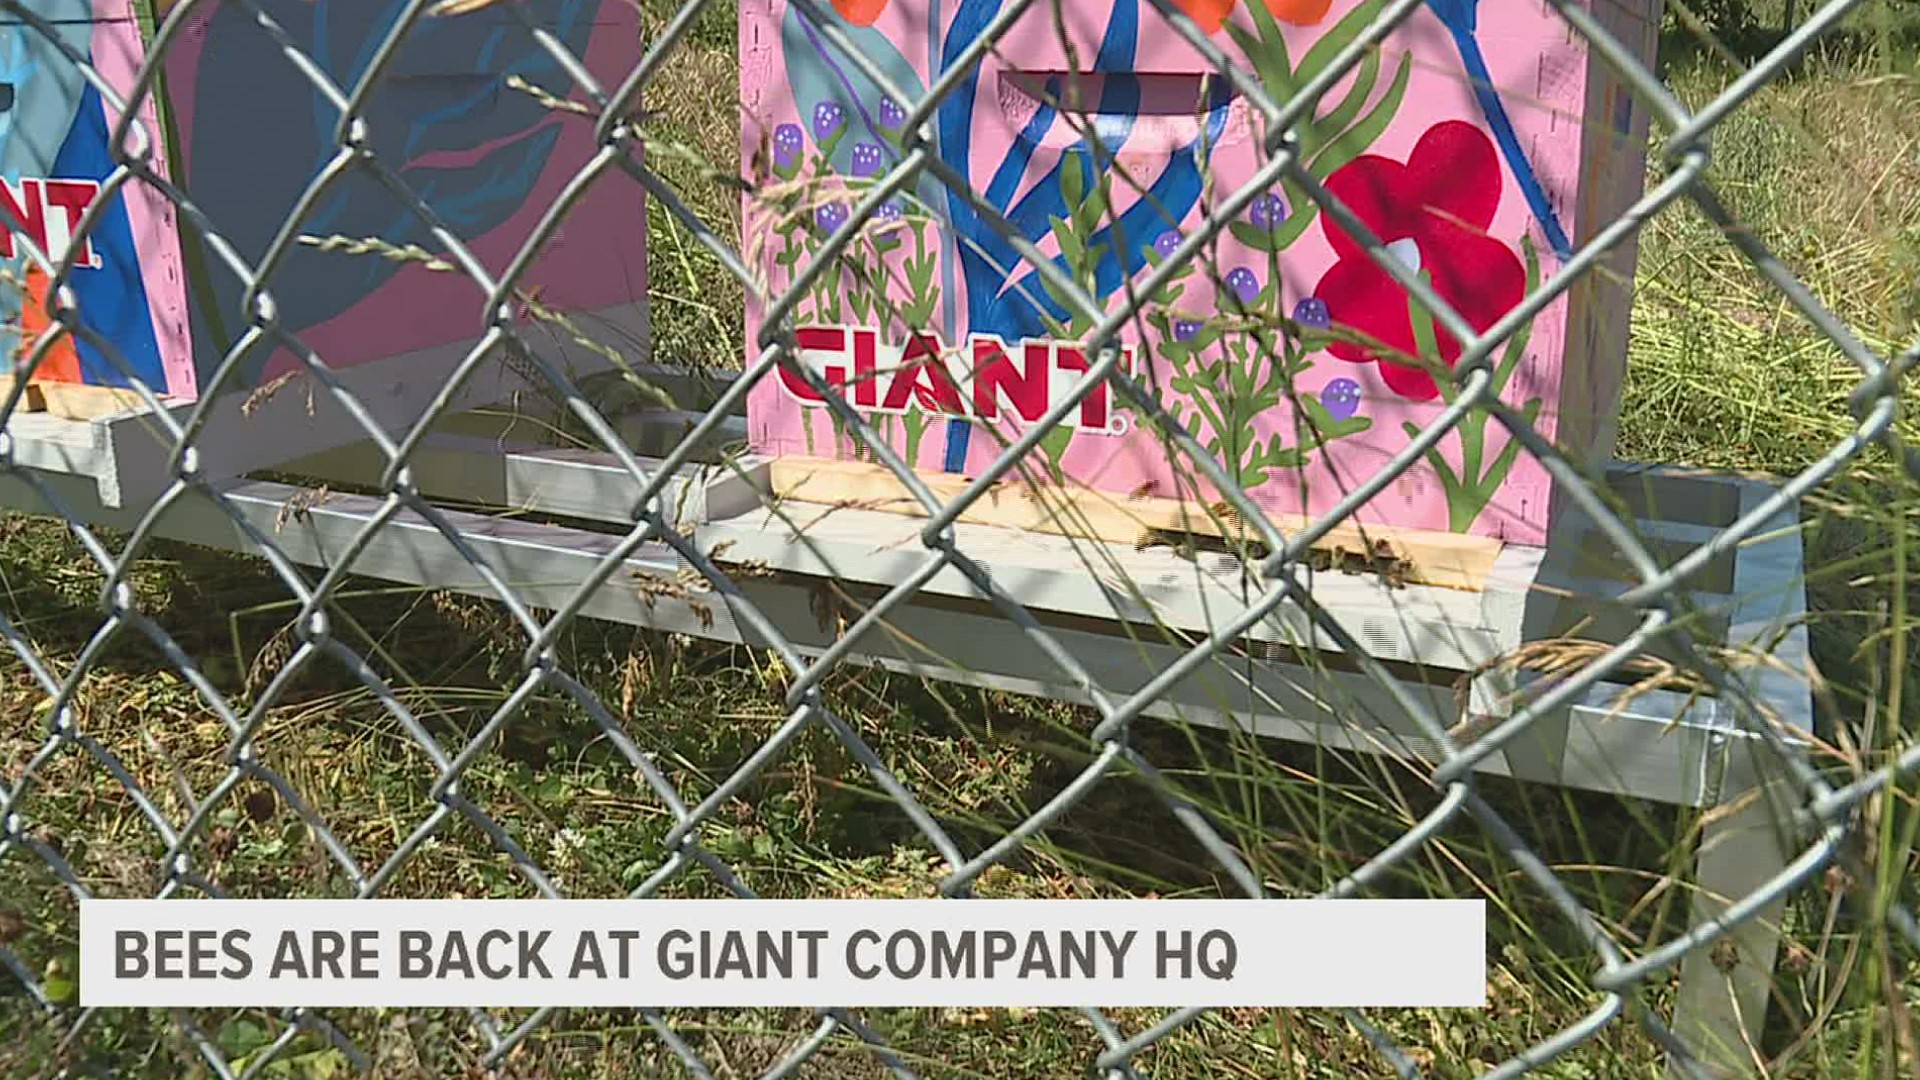 Earlier this year, beehives were stolen from Giant's Carlisle headquarters. They've now returned.